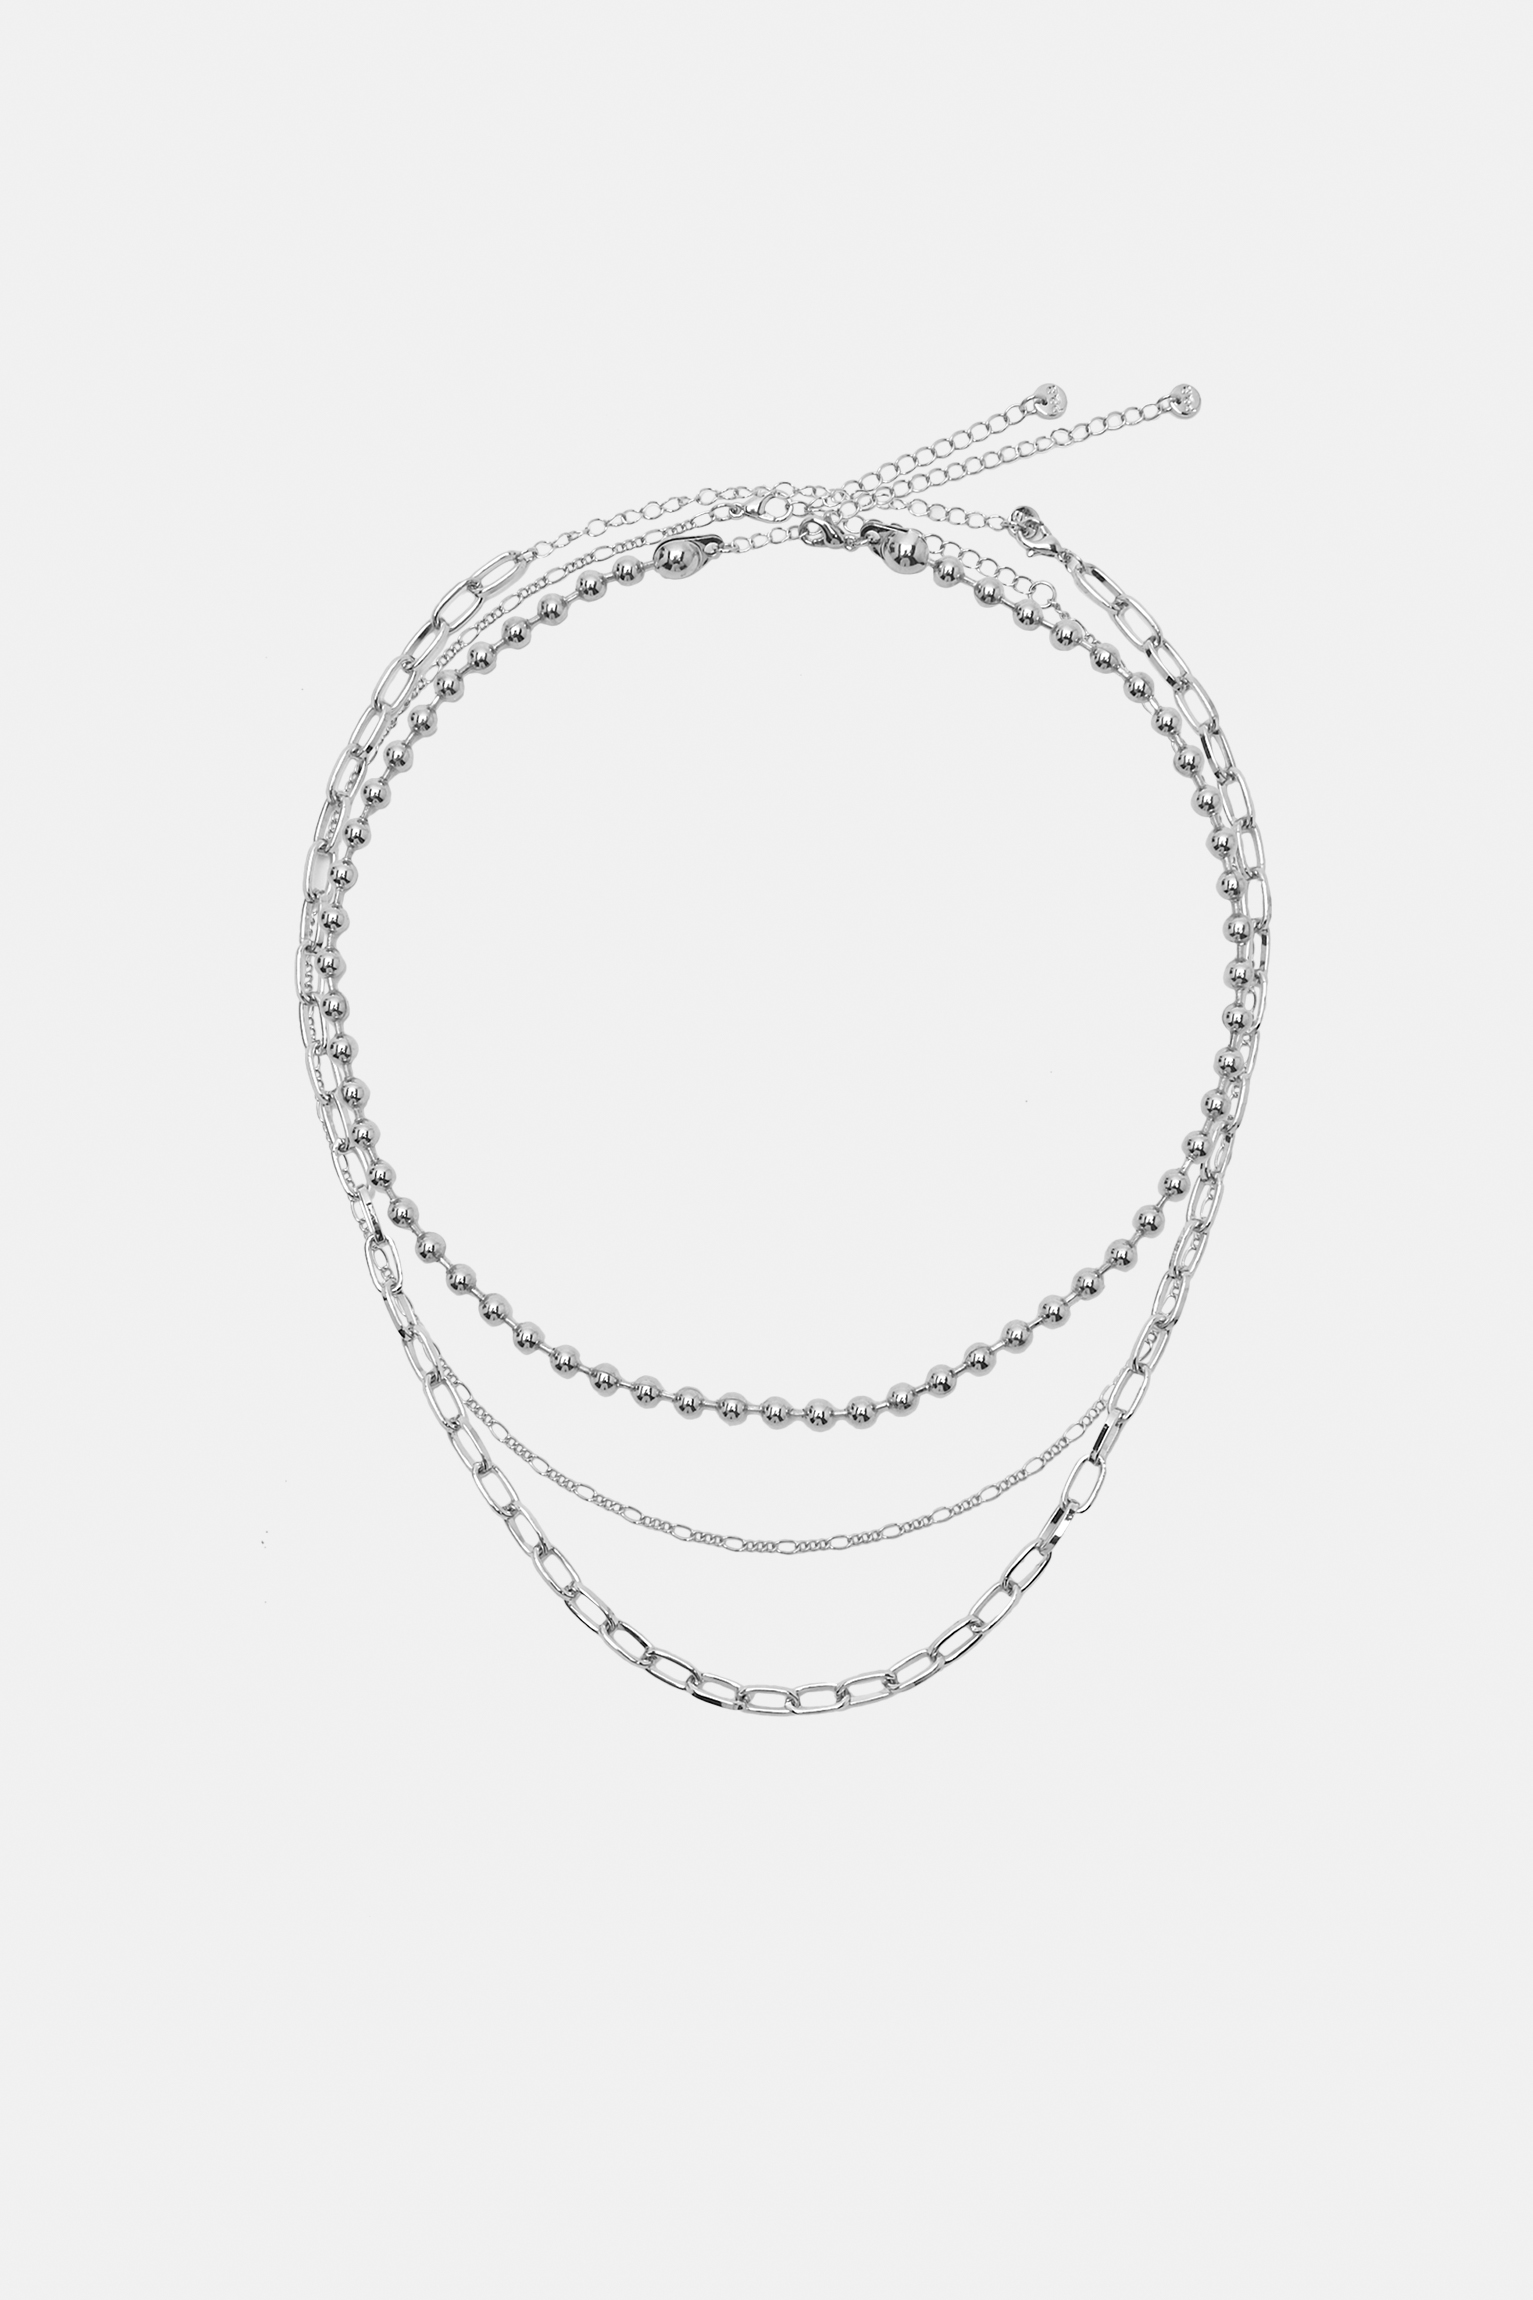 The Jewels - Round Sterling Silver Dholki Beads Necklace – shopthejewels.in